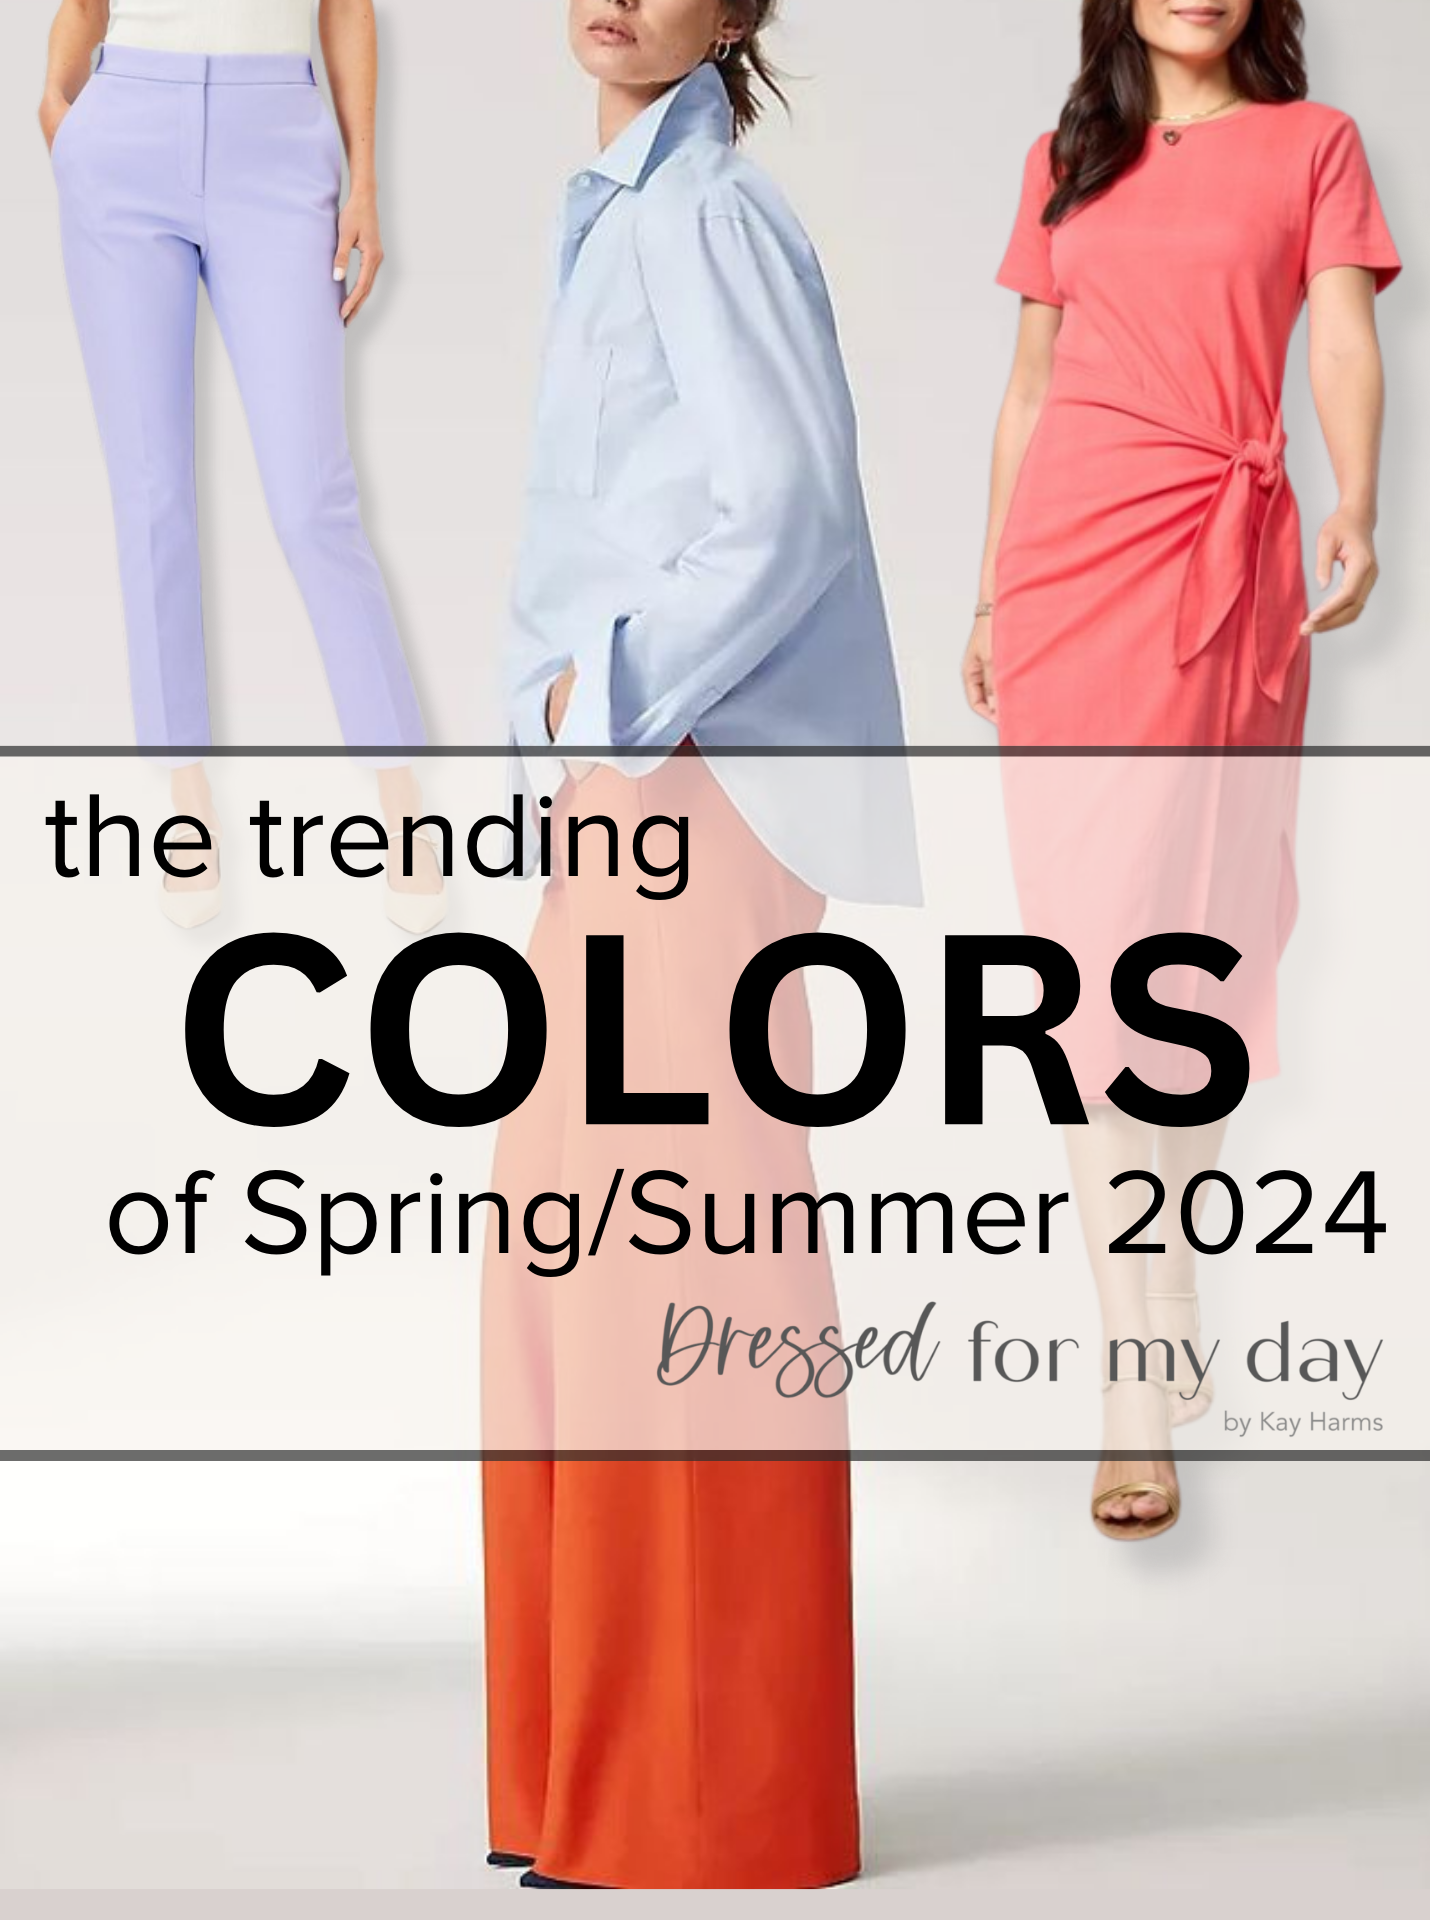 The Trending Colors of Spring/Summer 2024